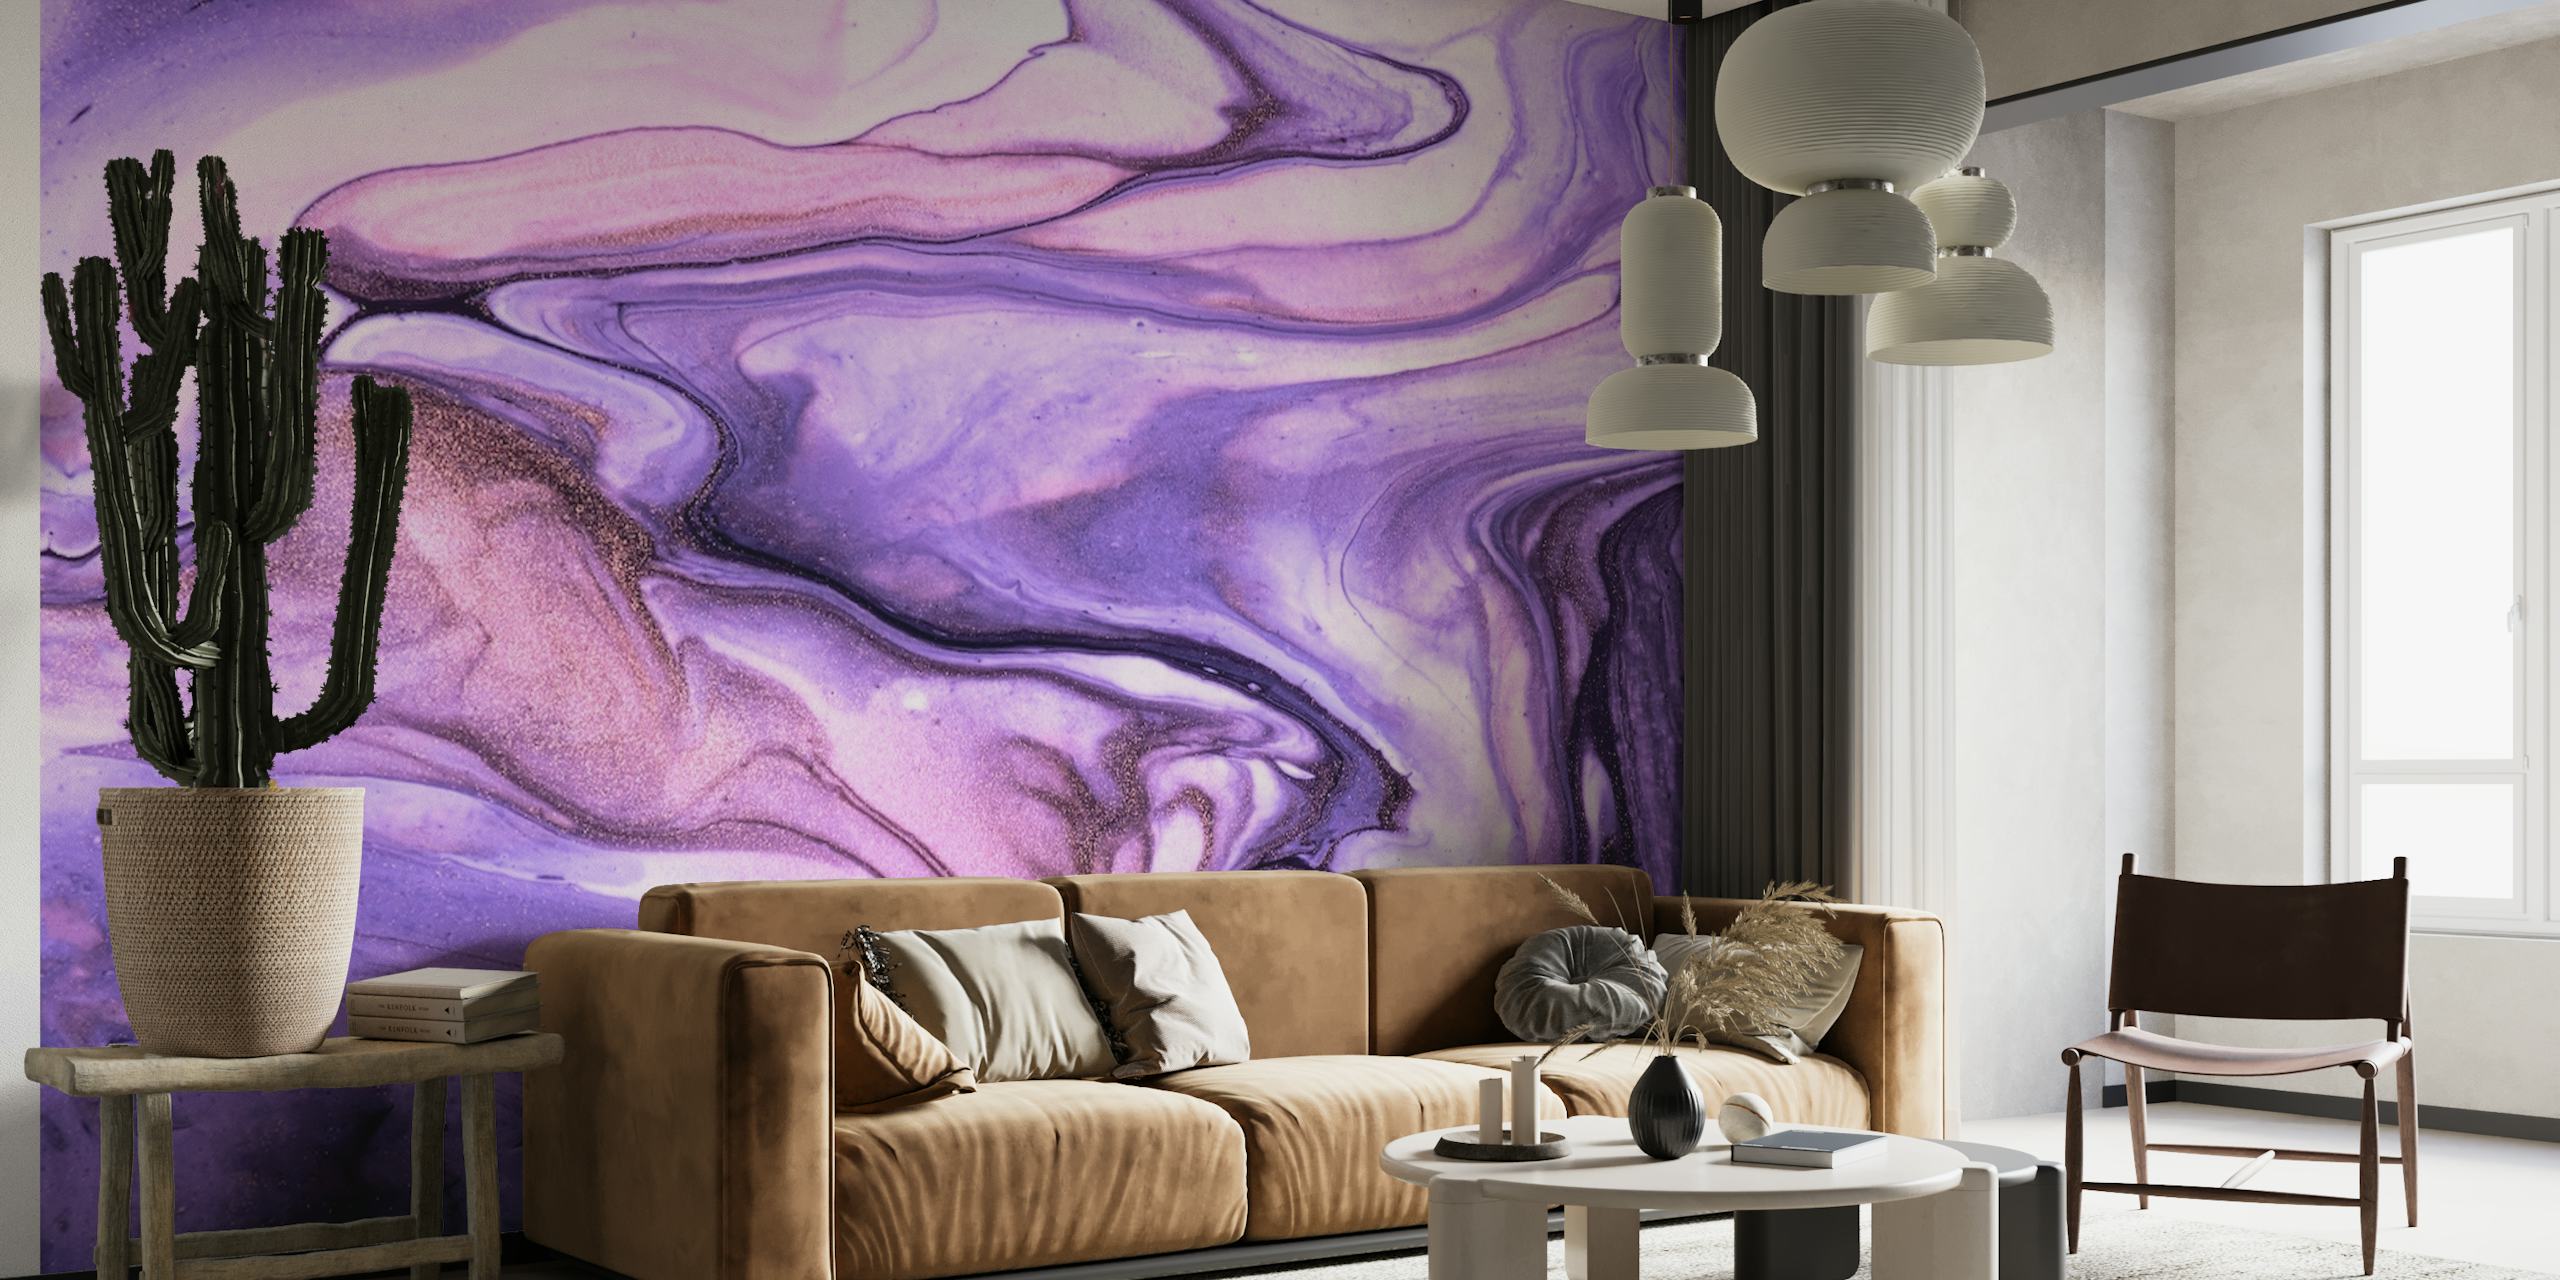 Abstract purple marble wall mural with lilac, plum, and beige swirls